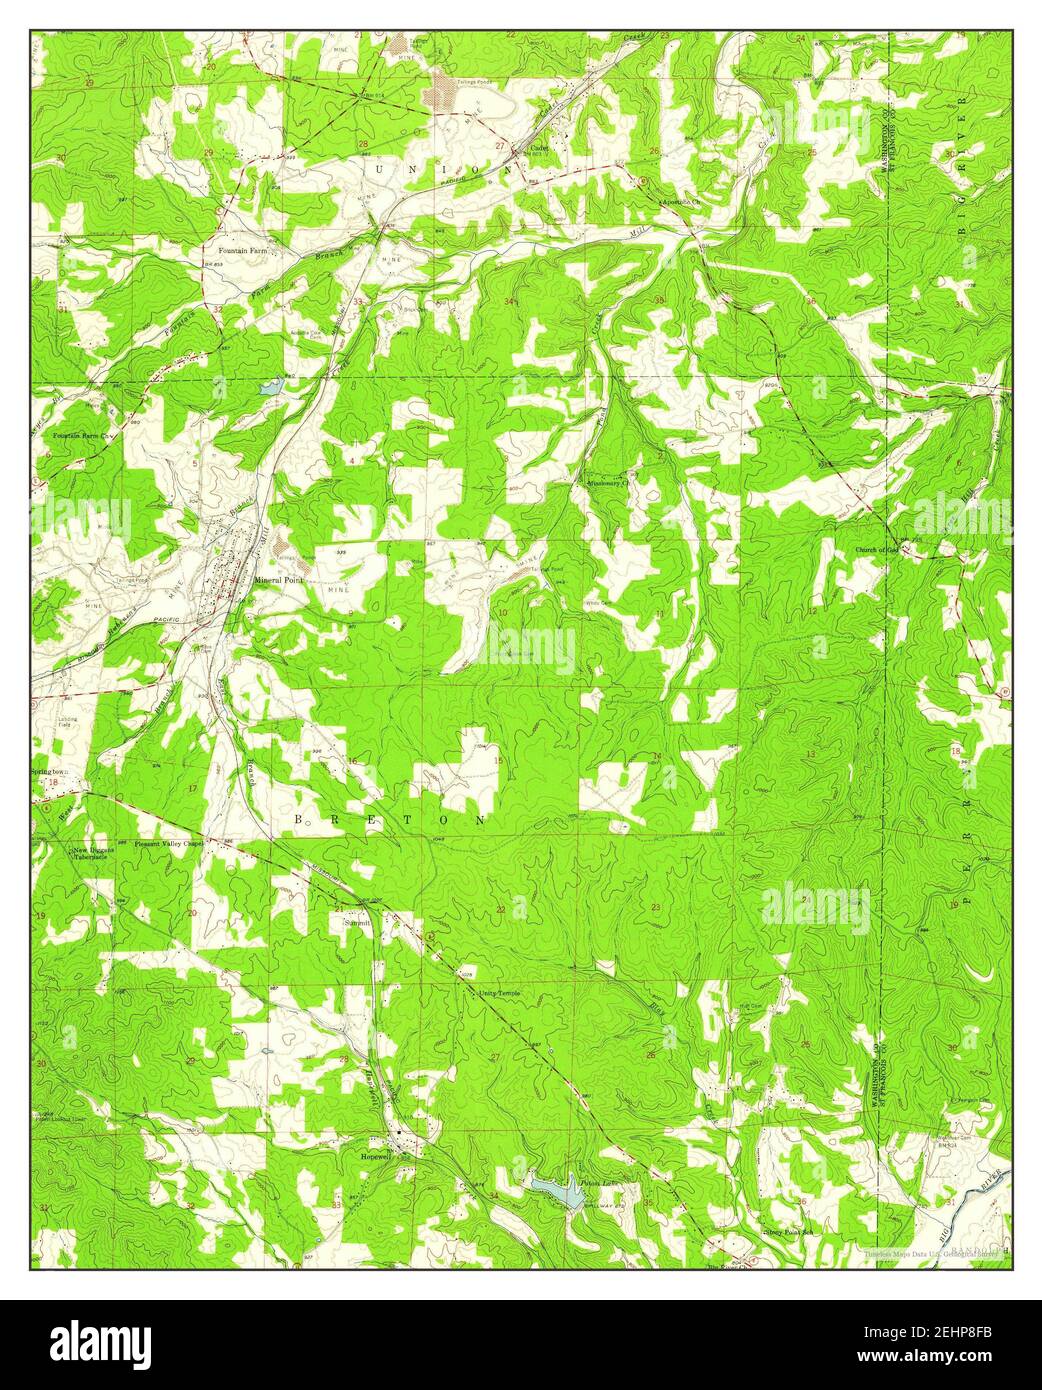 Mineral Point, Missouri, map 1958, 1:24000, United States of America by Timeless Maps, data U.S. Geological Survey Foto Stock